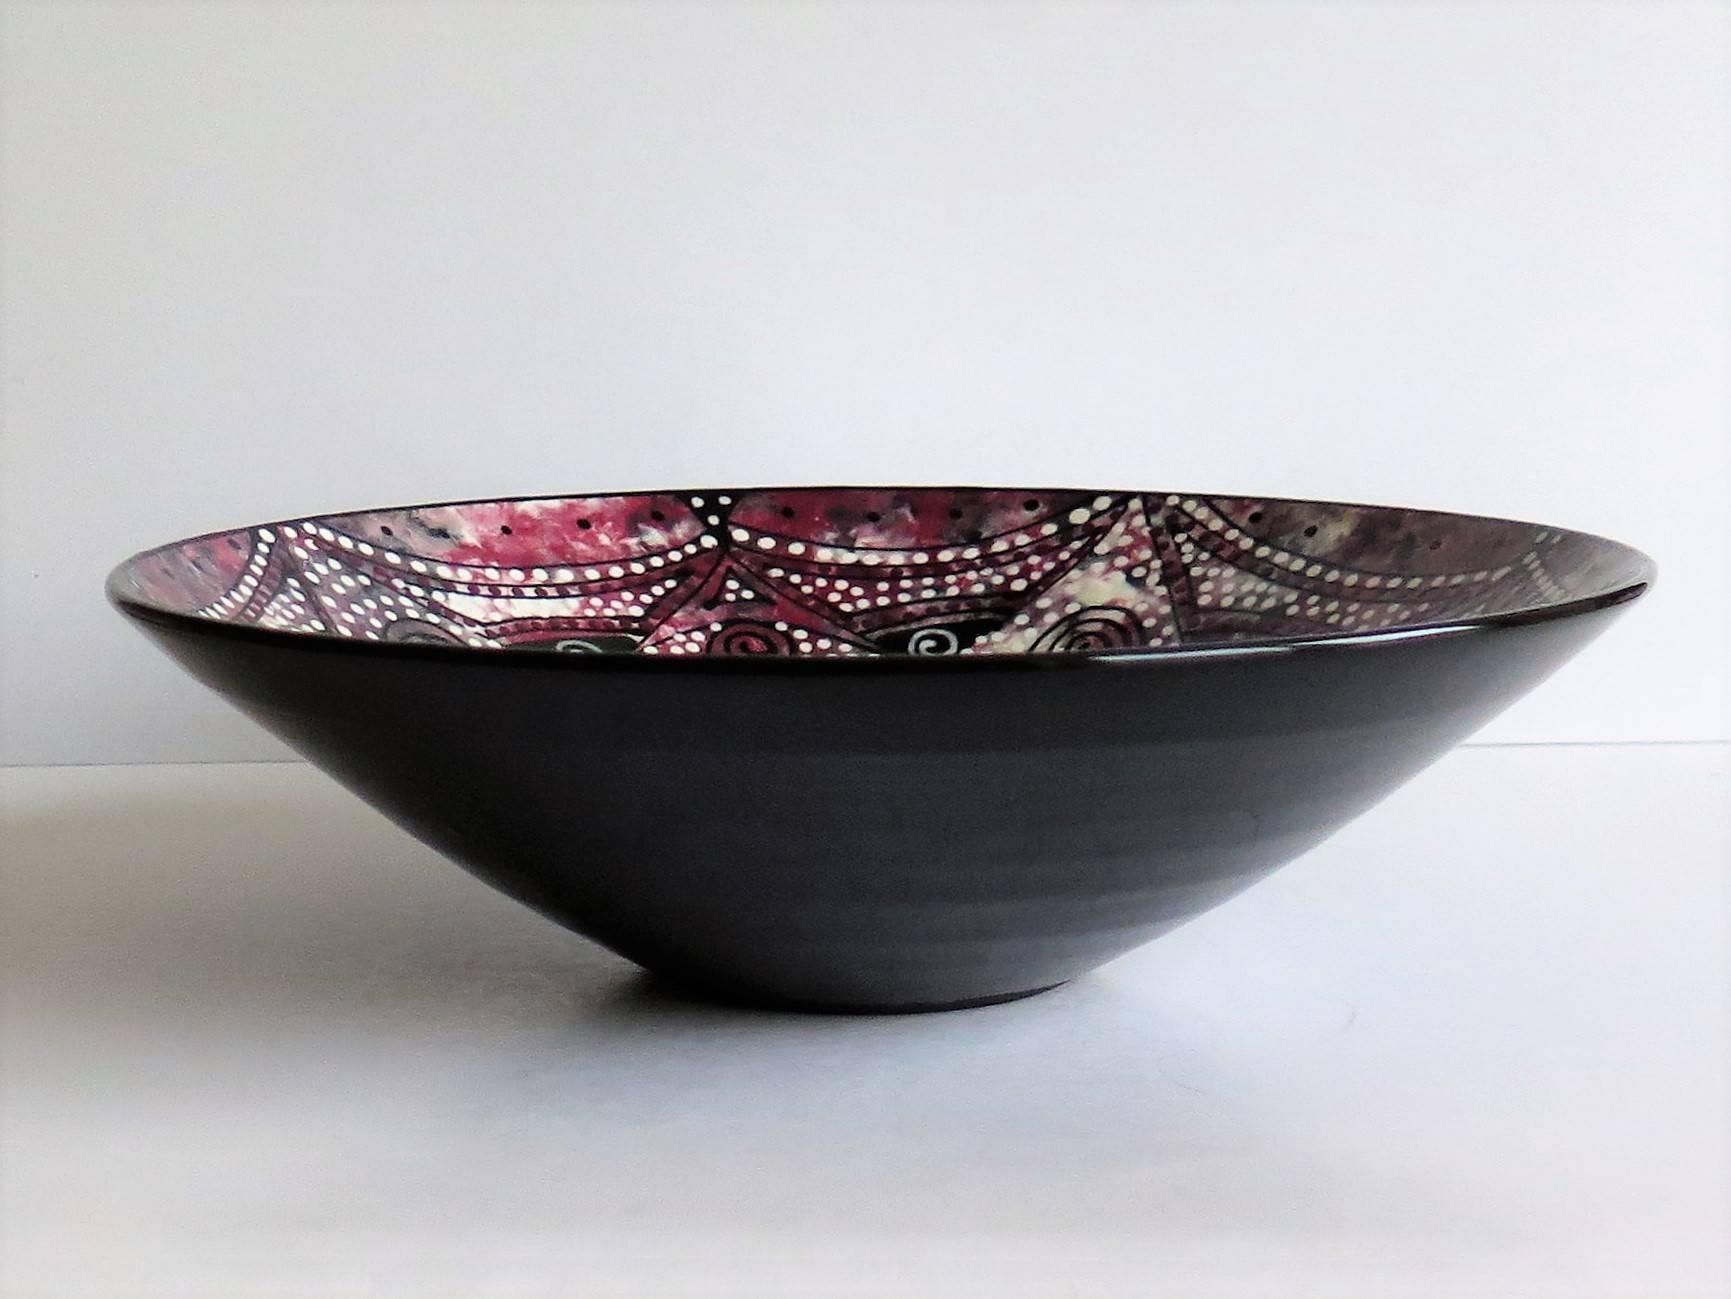 This is an unusual, beautiful and very decorative, Studio Pottery bowl.

The bowl is hand thrown and finely potted.

It is hand painted to the inside with a mottled dappled effect using colors which include white, grey, blue, red, pink, all in